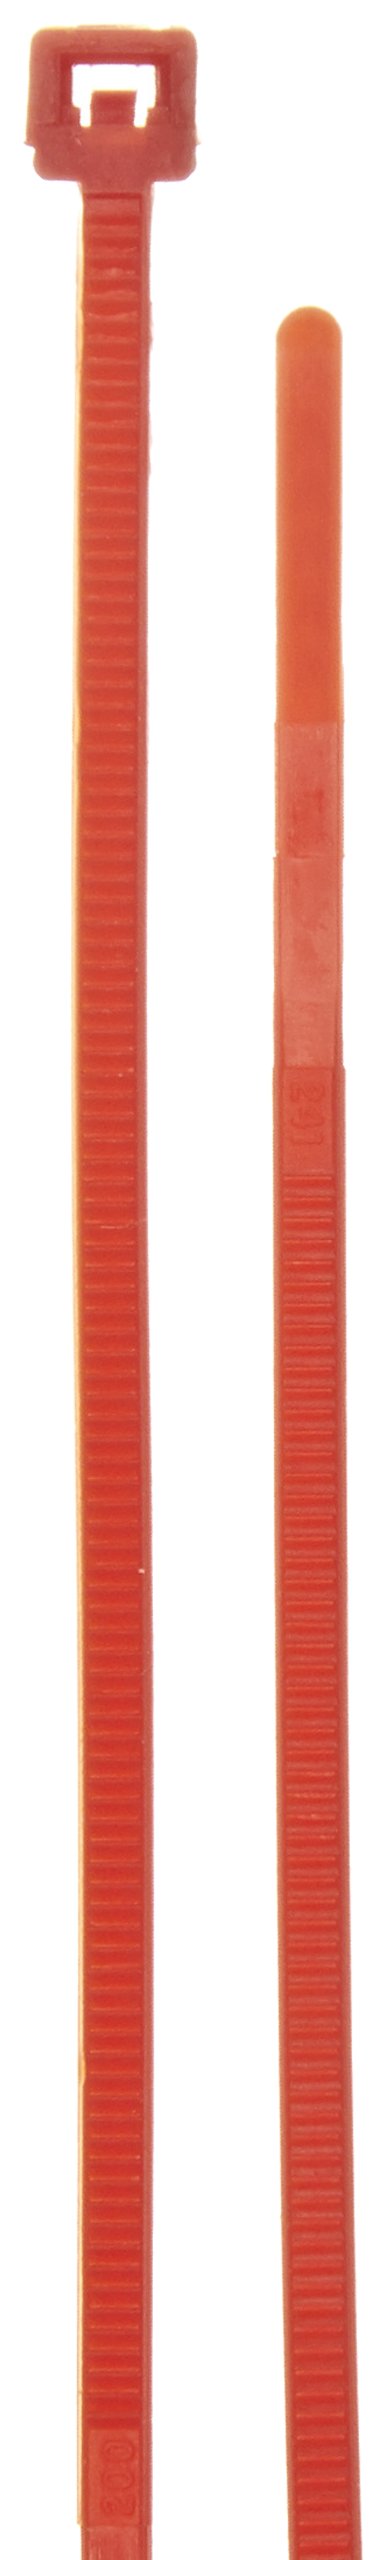  [AUSTRALIA] - Aviditi 4" Nylon Cable Ties, Red, 18 lb. Strength.10" Width, Tamper Proof Zip Ties, Self Locking, Bundle and Organize Wires/Cables in Warehouse, Garage, Home or Office, Case of 1000